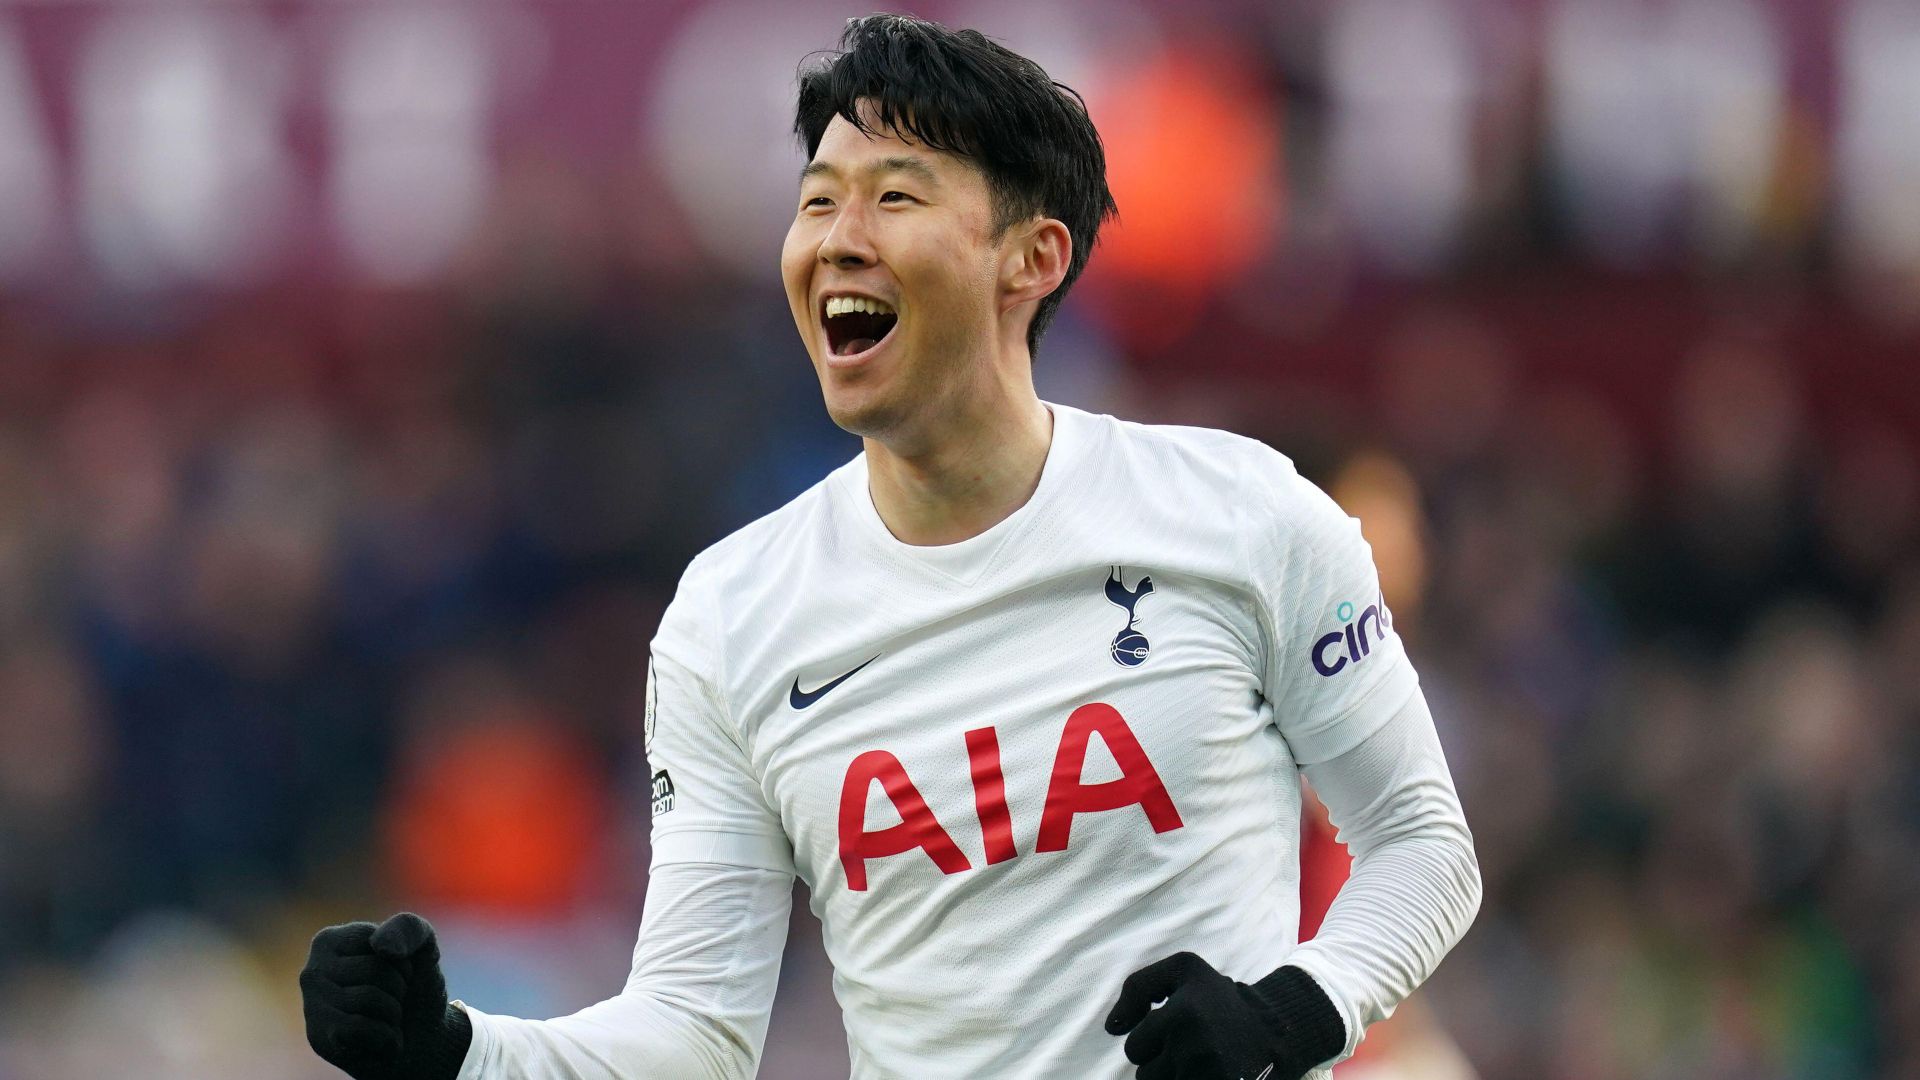 Son Heung-min's receives praises from South Korean President after 'joyous' Golden Boot win in EPL